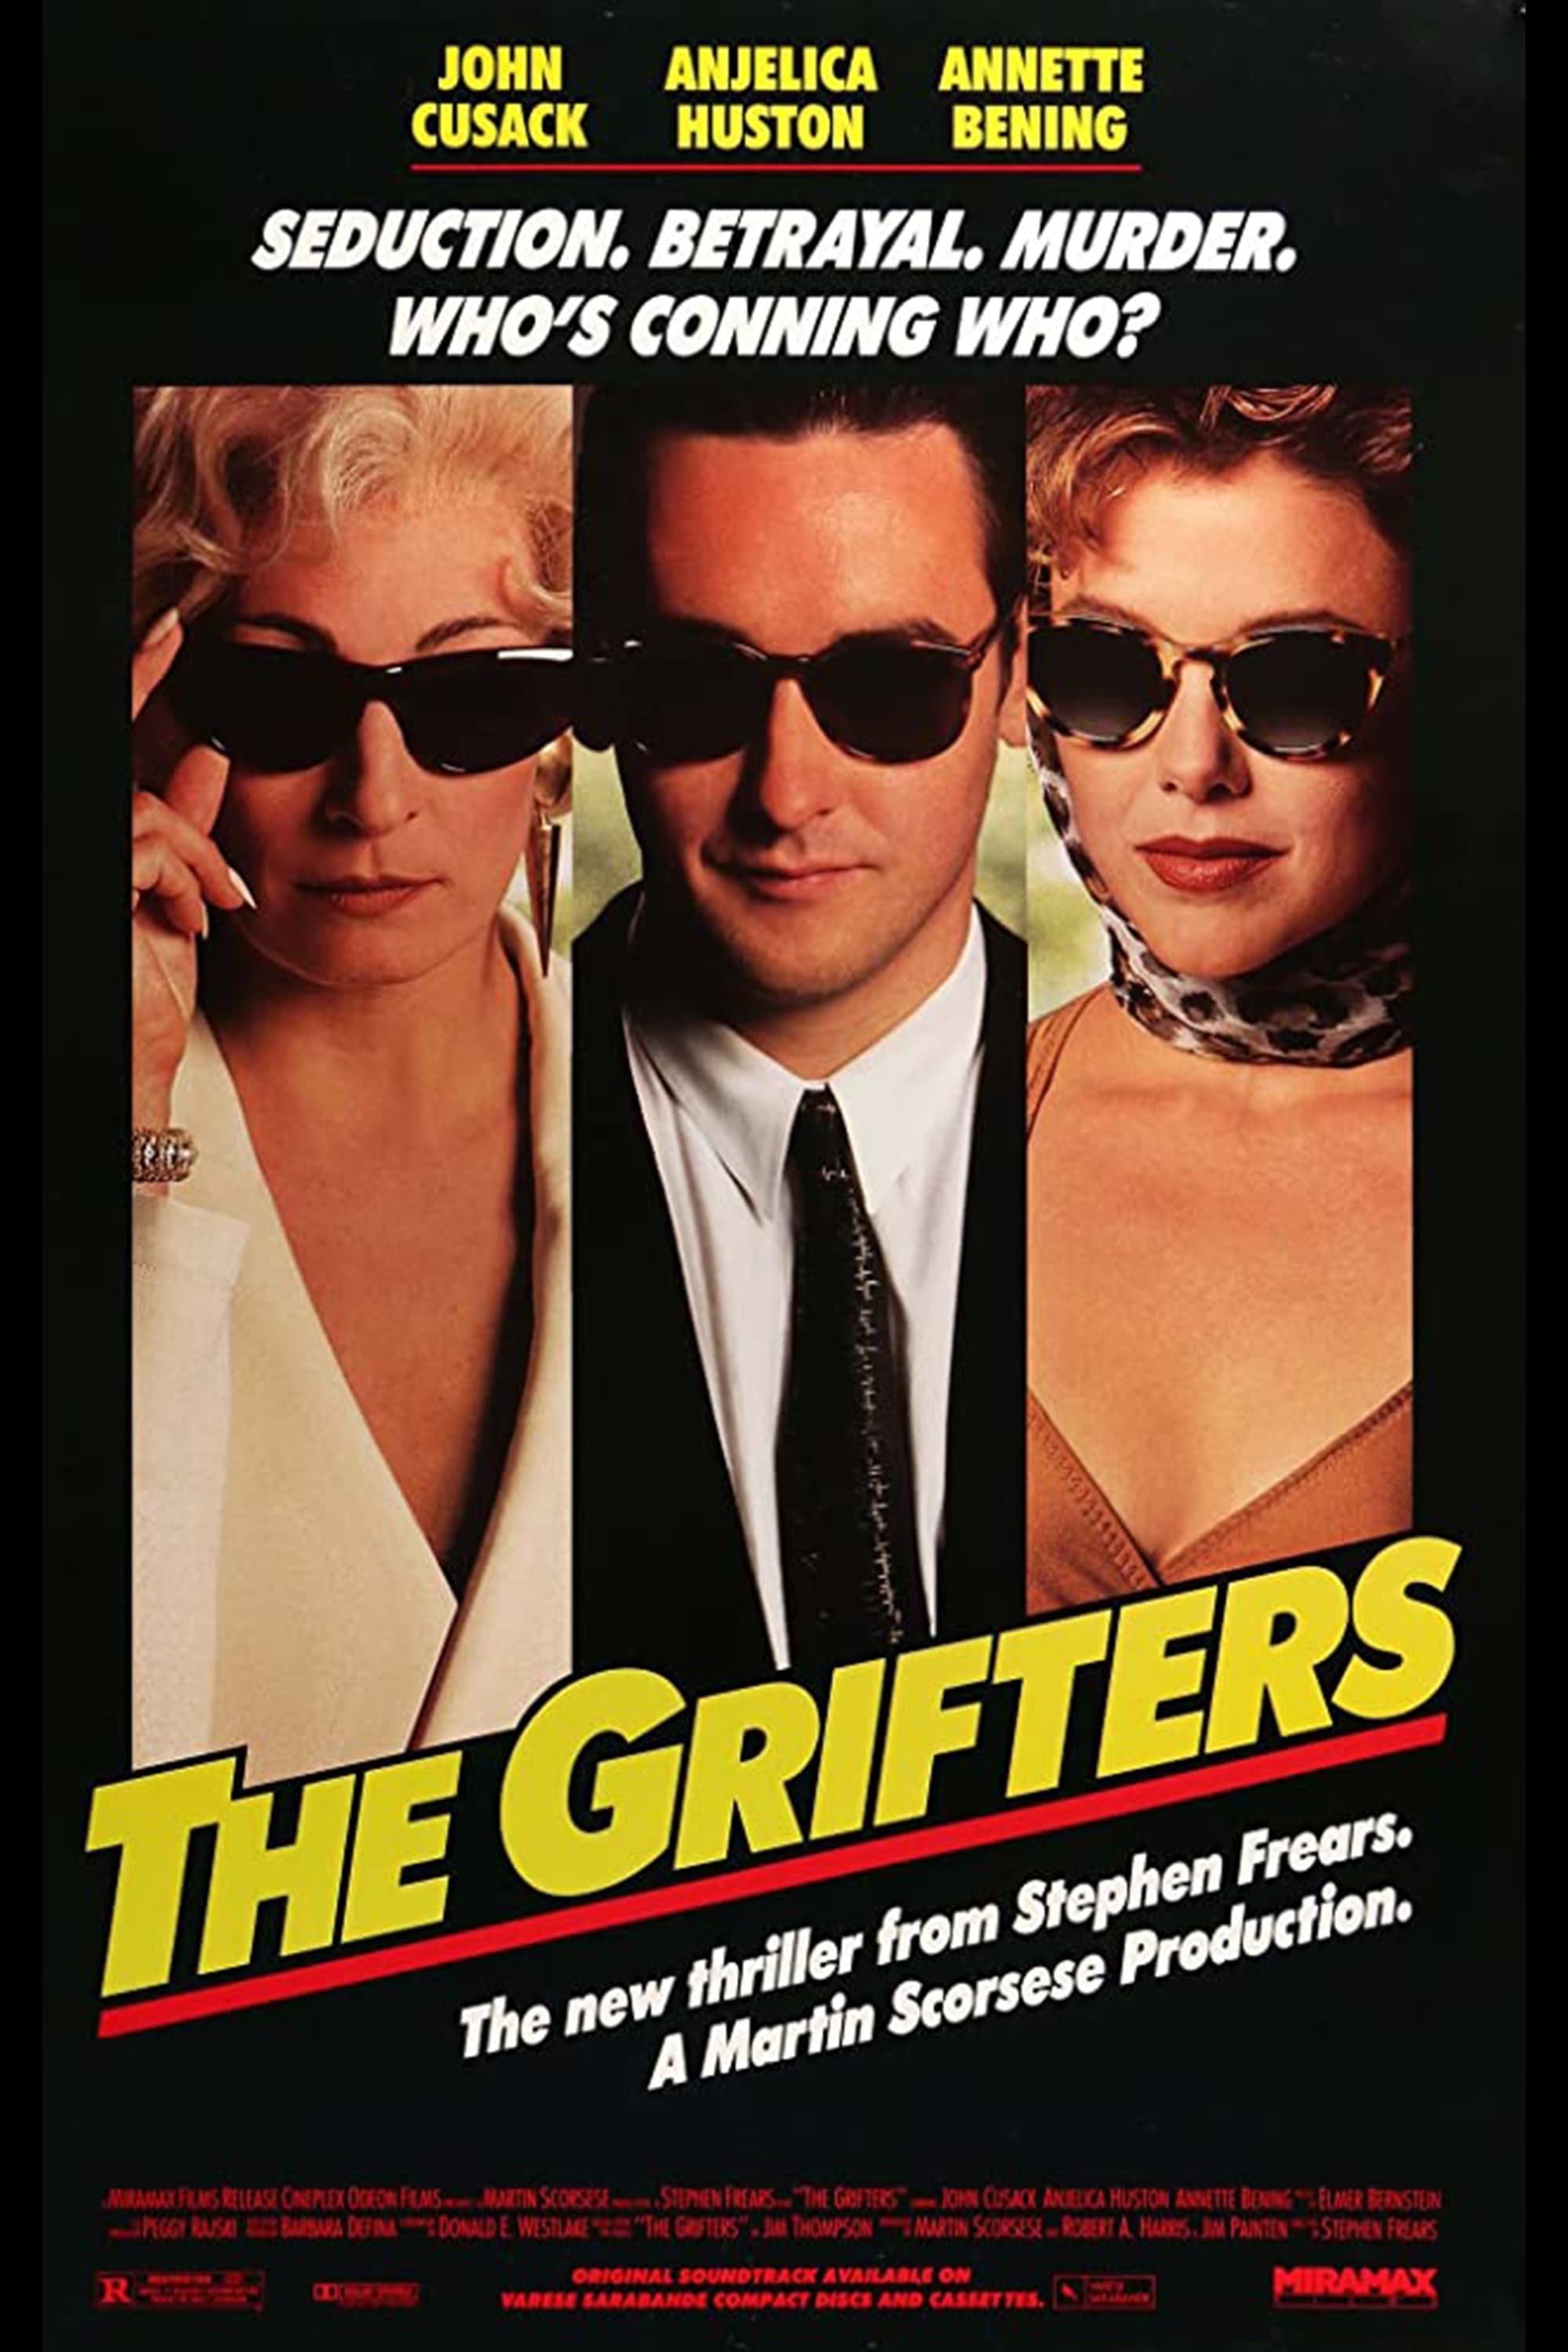 THE GRIFTERS POSTER 1.jpg